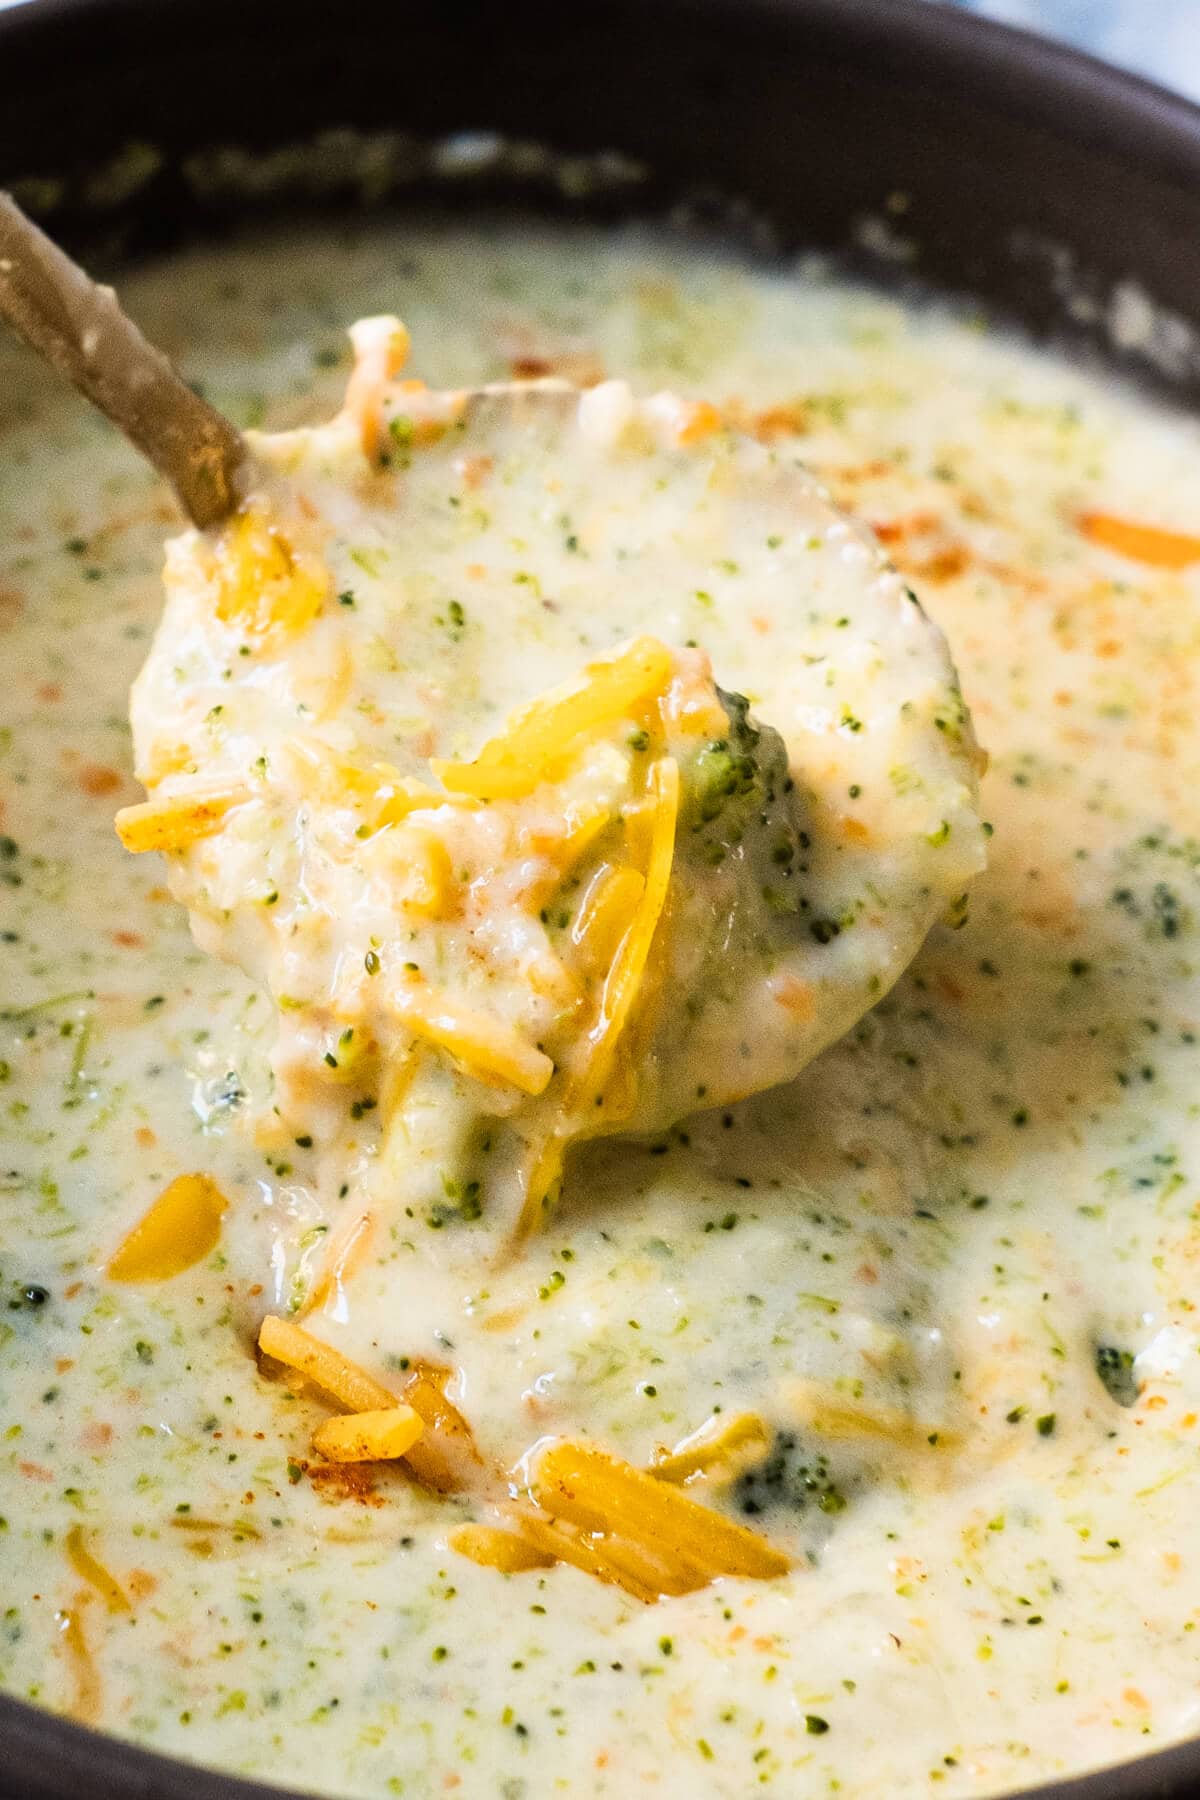 Thick, creamy broccoli cheddar soup scooped by the spoon. 